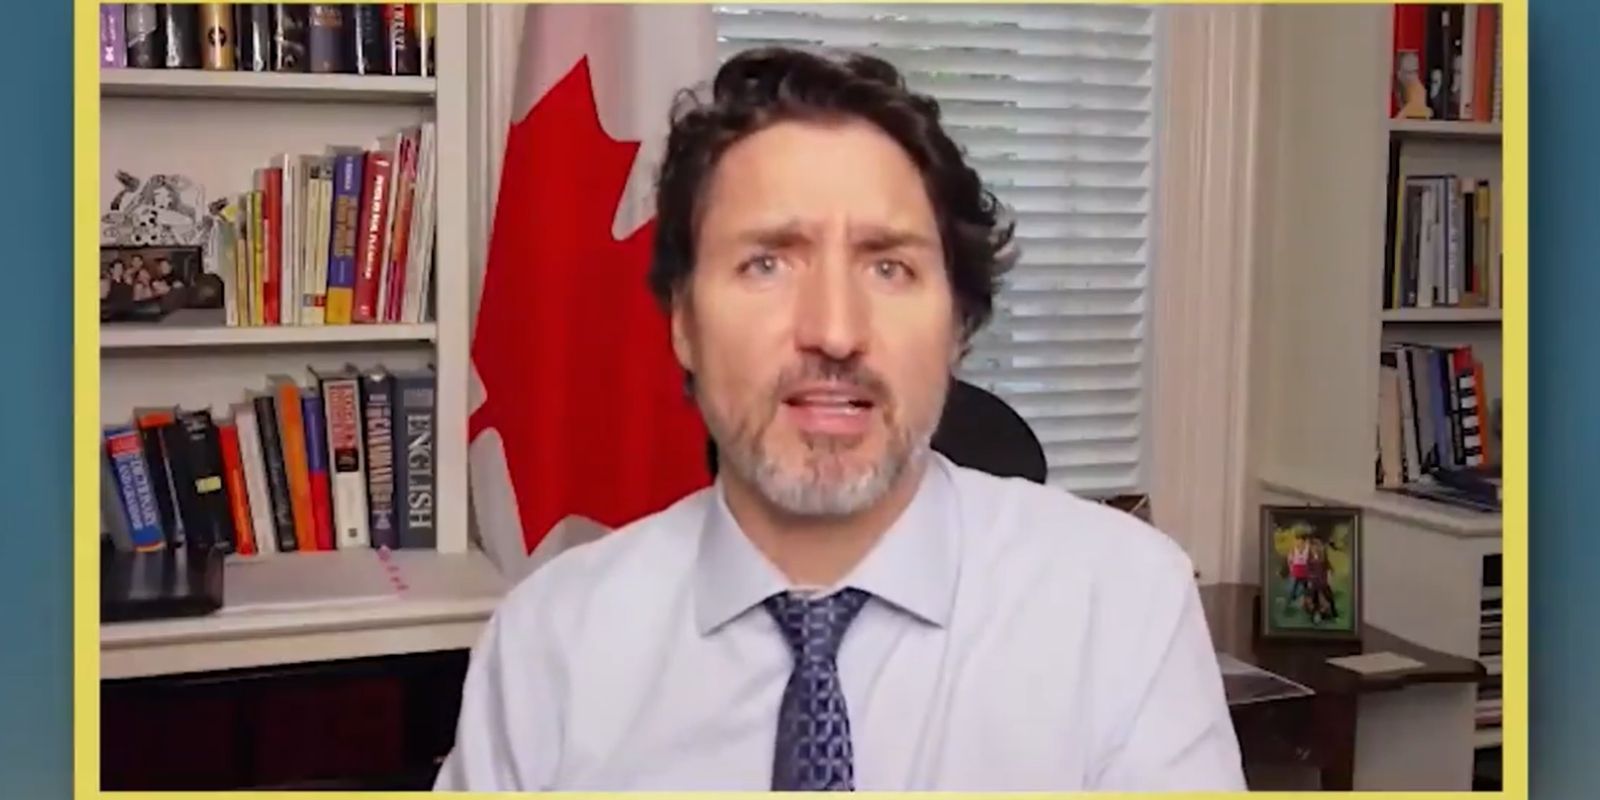 TRUDEAU FLASHBACK: 'We're not a country that makes vaccinations mandatory'